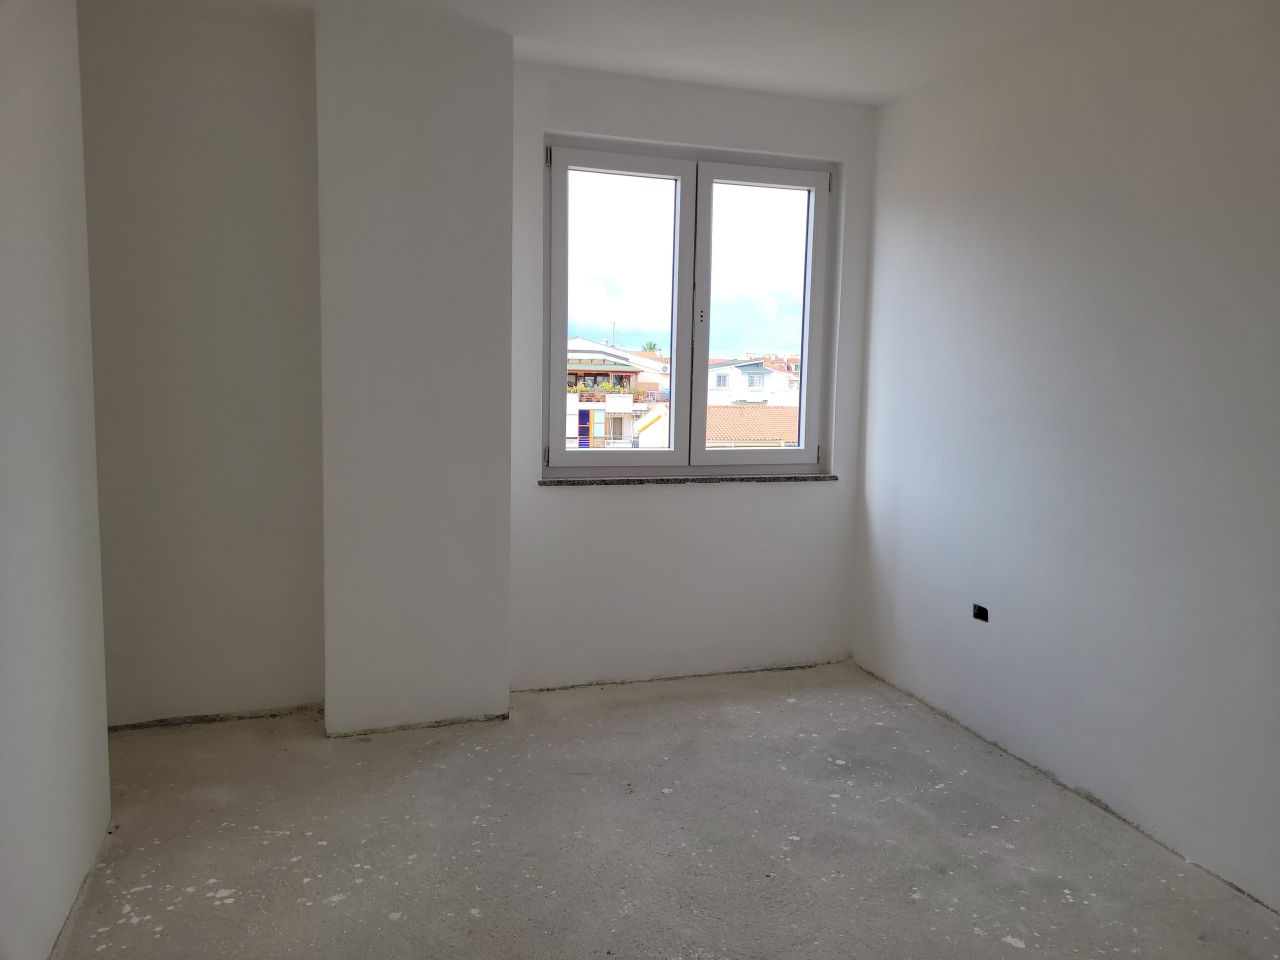 Apartment For Sale In Golem Durres Albania, Located In A Quiet Area, Close To The Beach